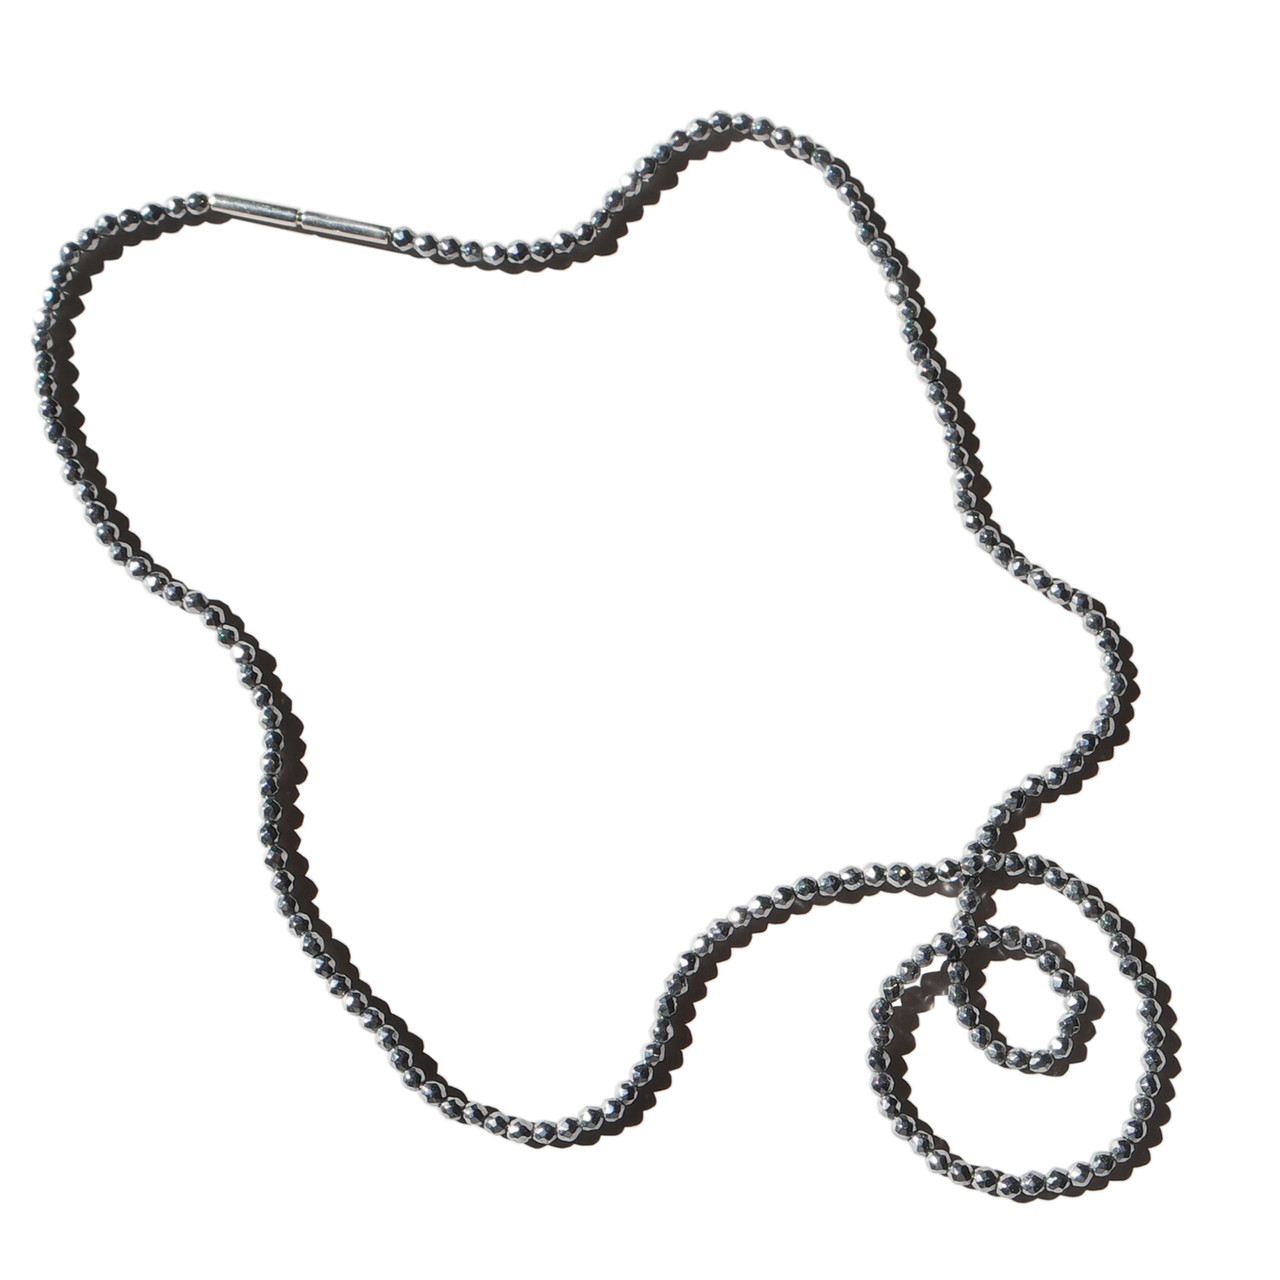 Sparkling Necklace fine by Saskia Diez available to shop online at tomfoolery london